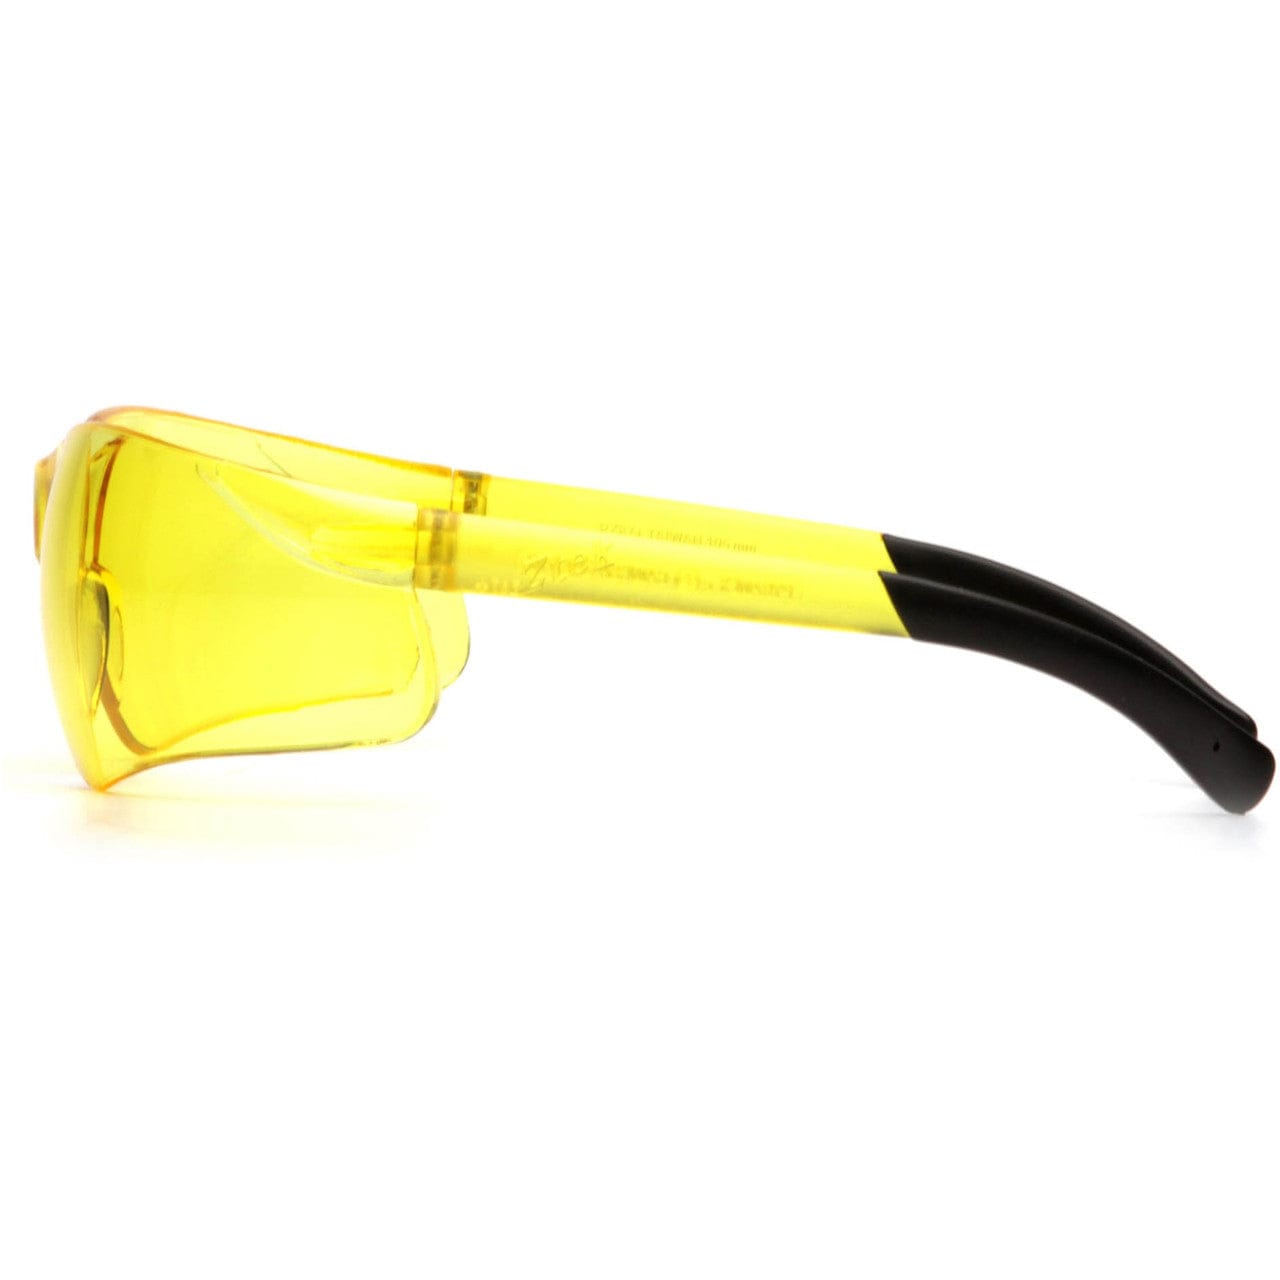 Pyramex Ztek Safety Glasses with Amber Lens S2530S Side View